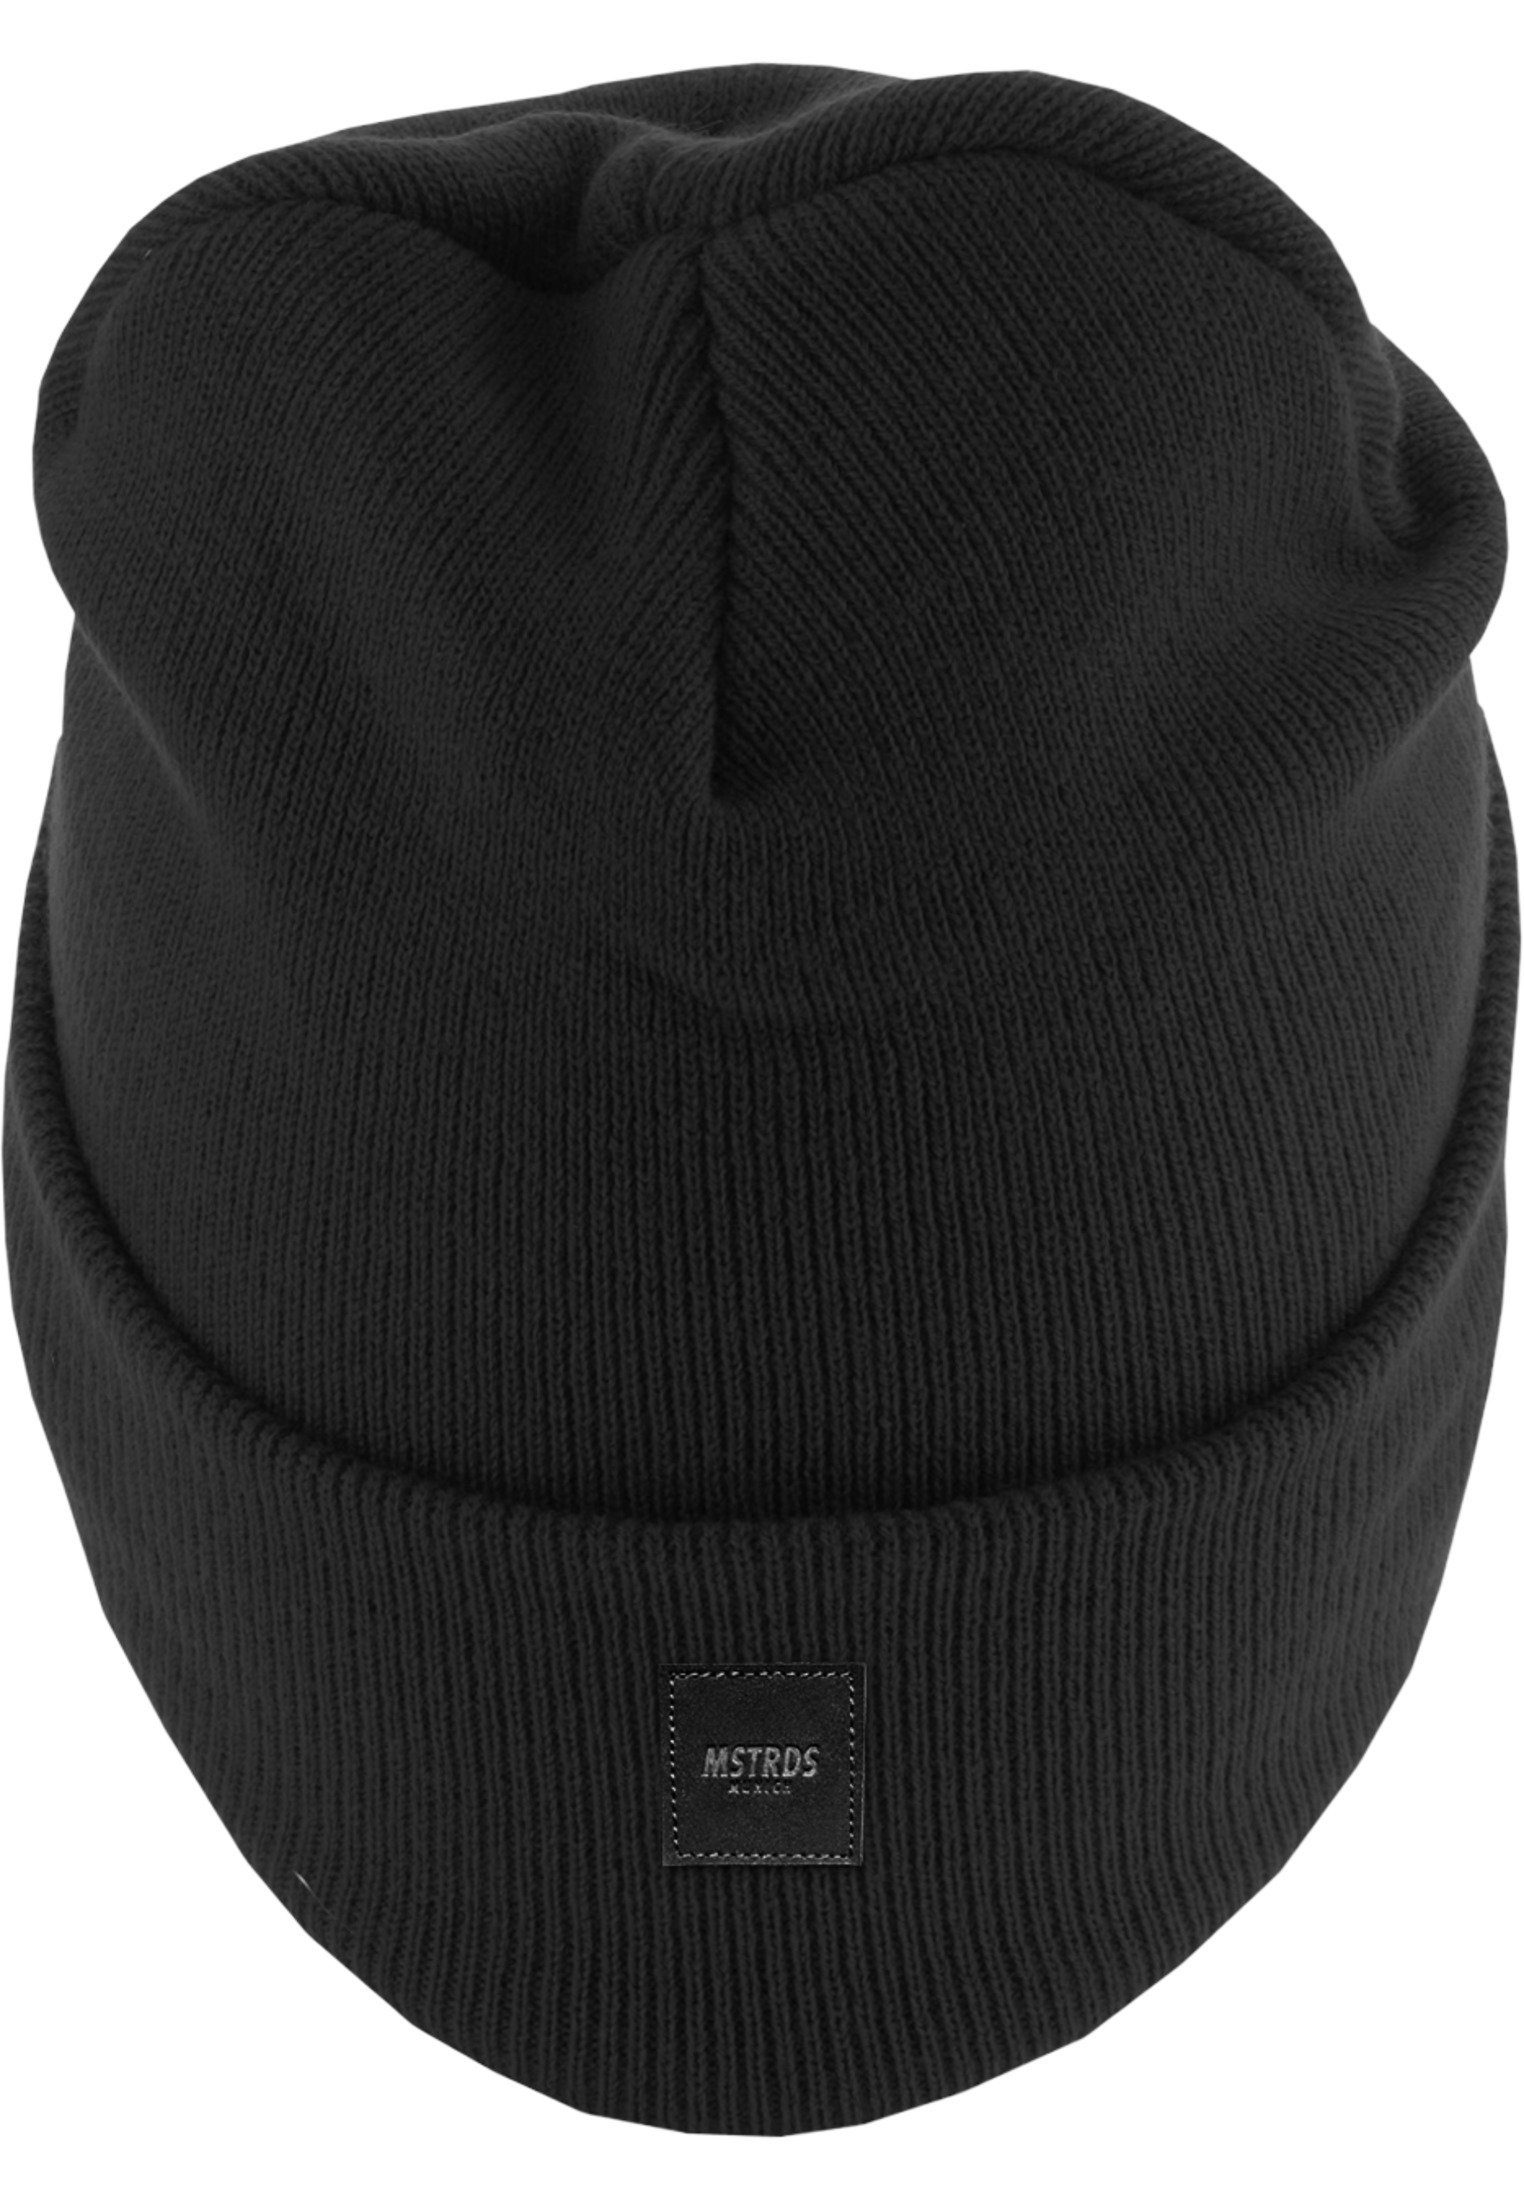 Beanie Beanie (1-St) Accessoires Cuff MSTRDS Letter Knit